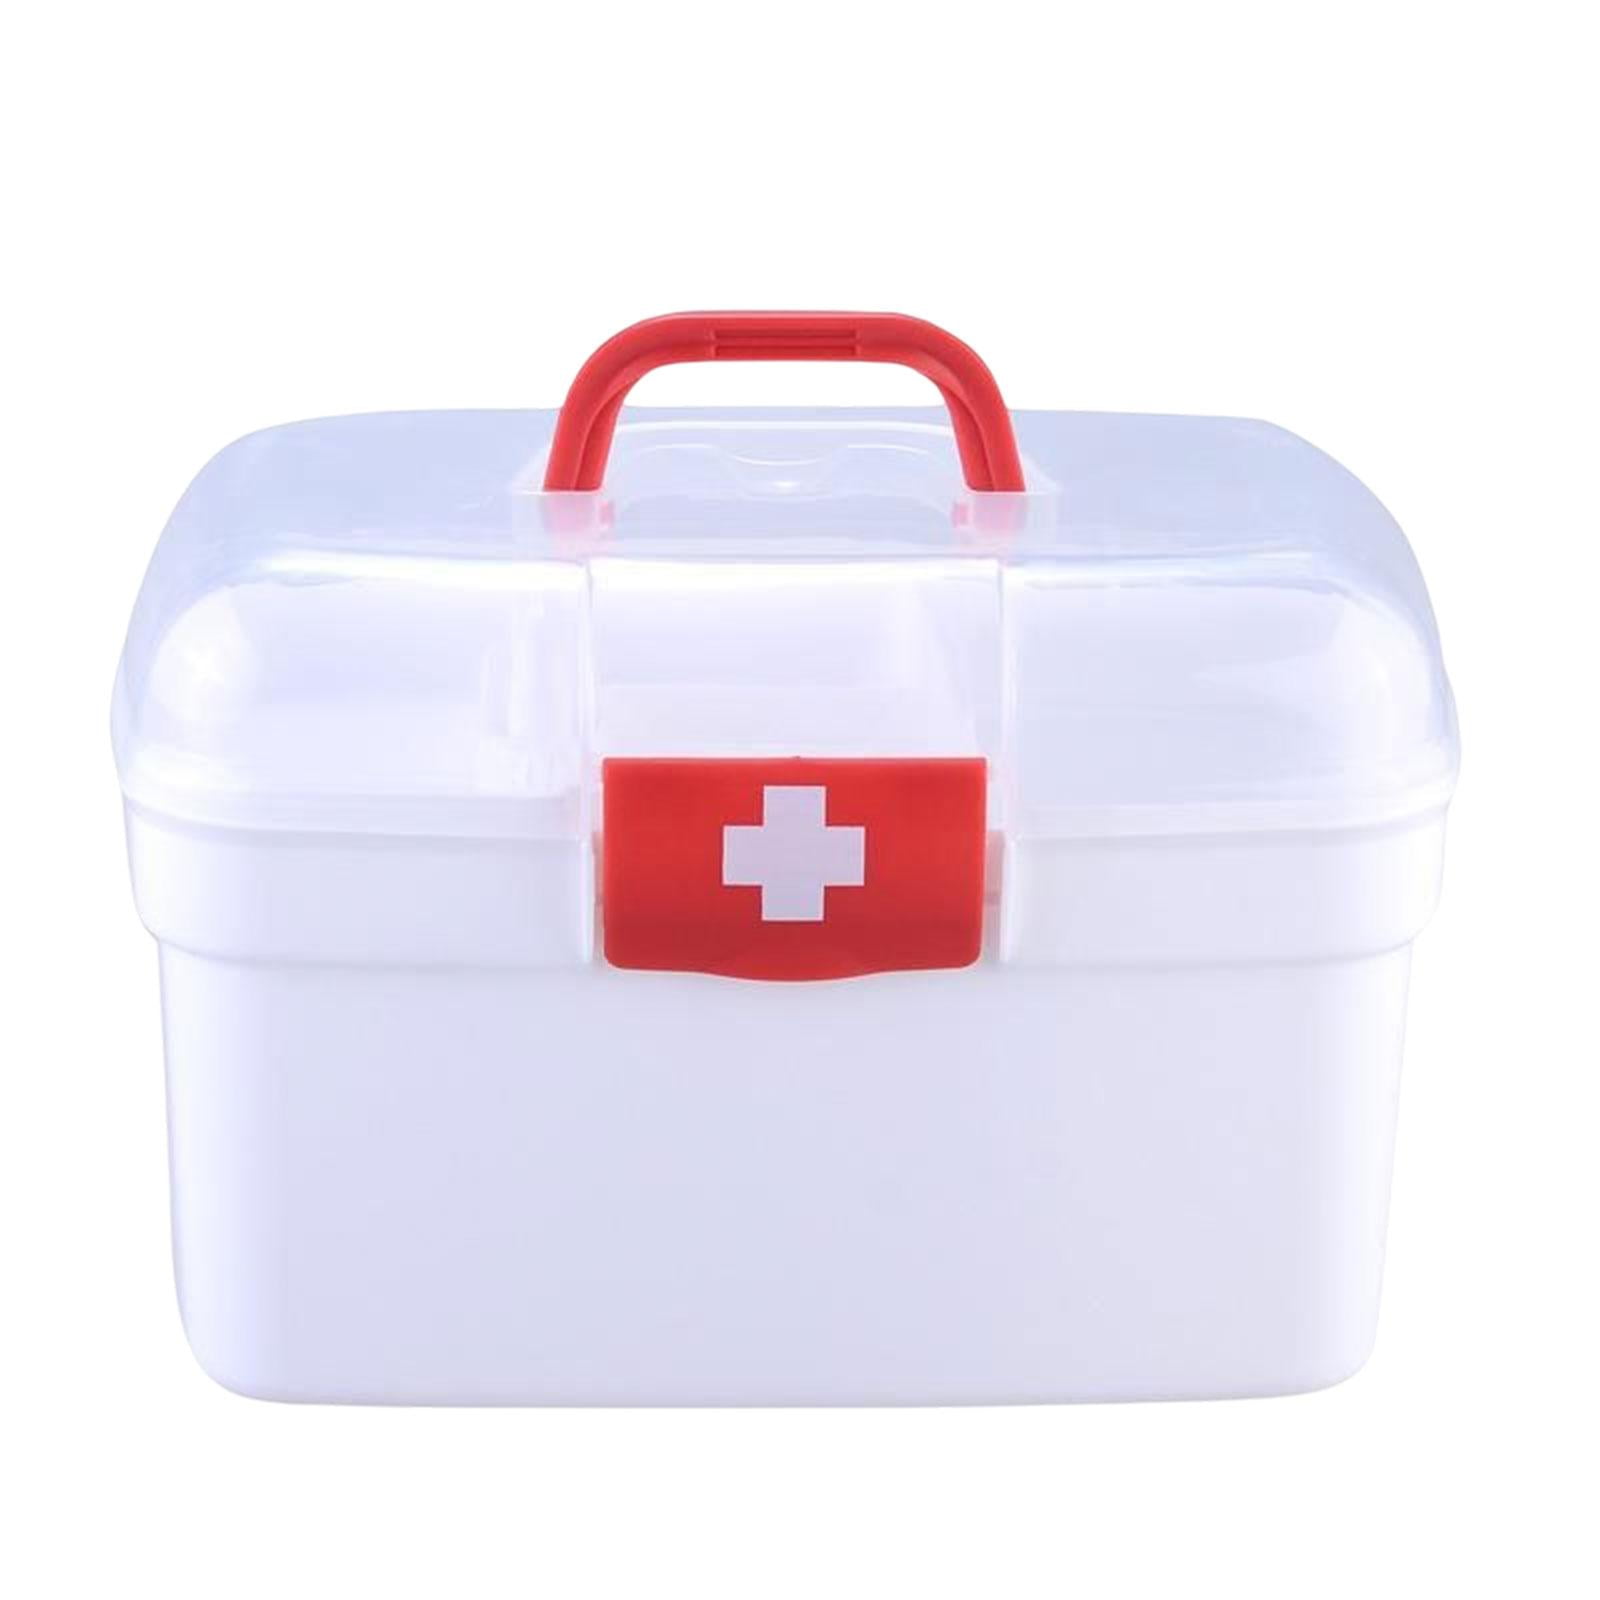 Multi Purpose Family First Aid Medical Box Container Bin Removable Tray  Household Storage Case for Outdoor Activities Car Travel Family L 